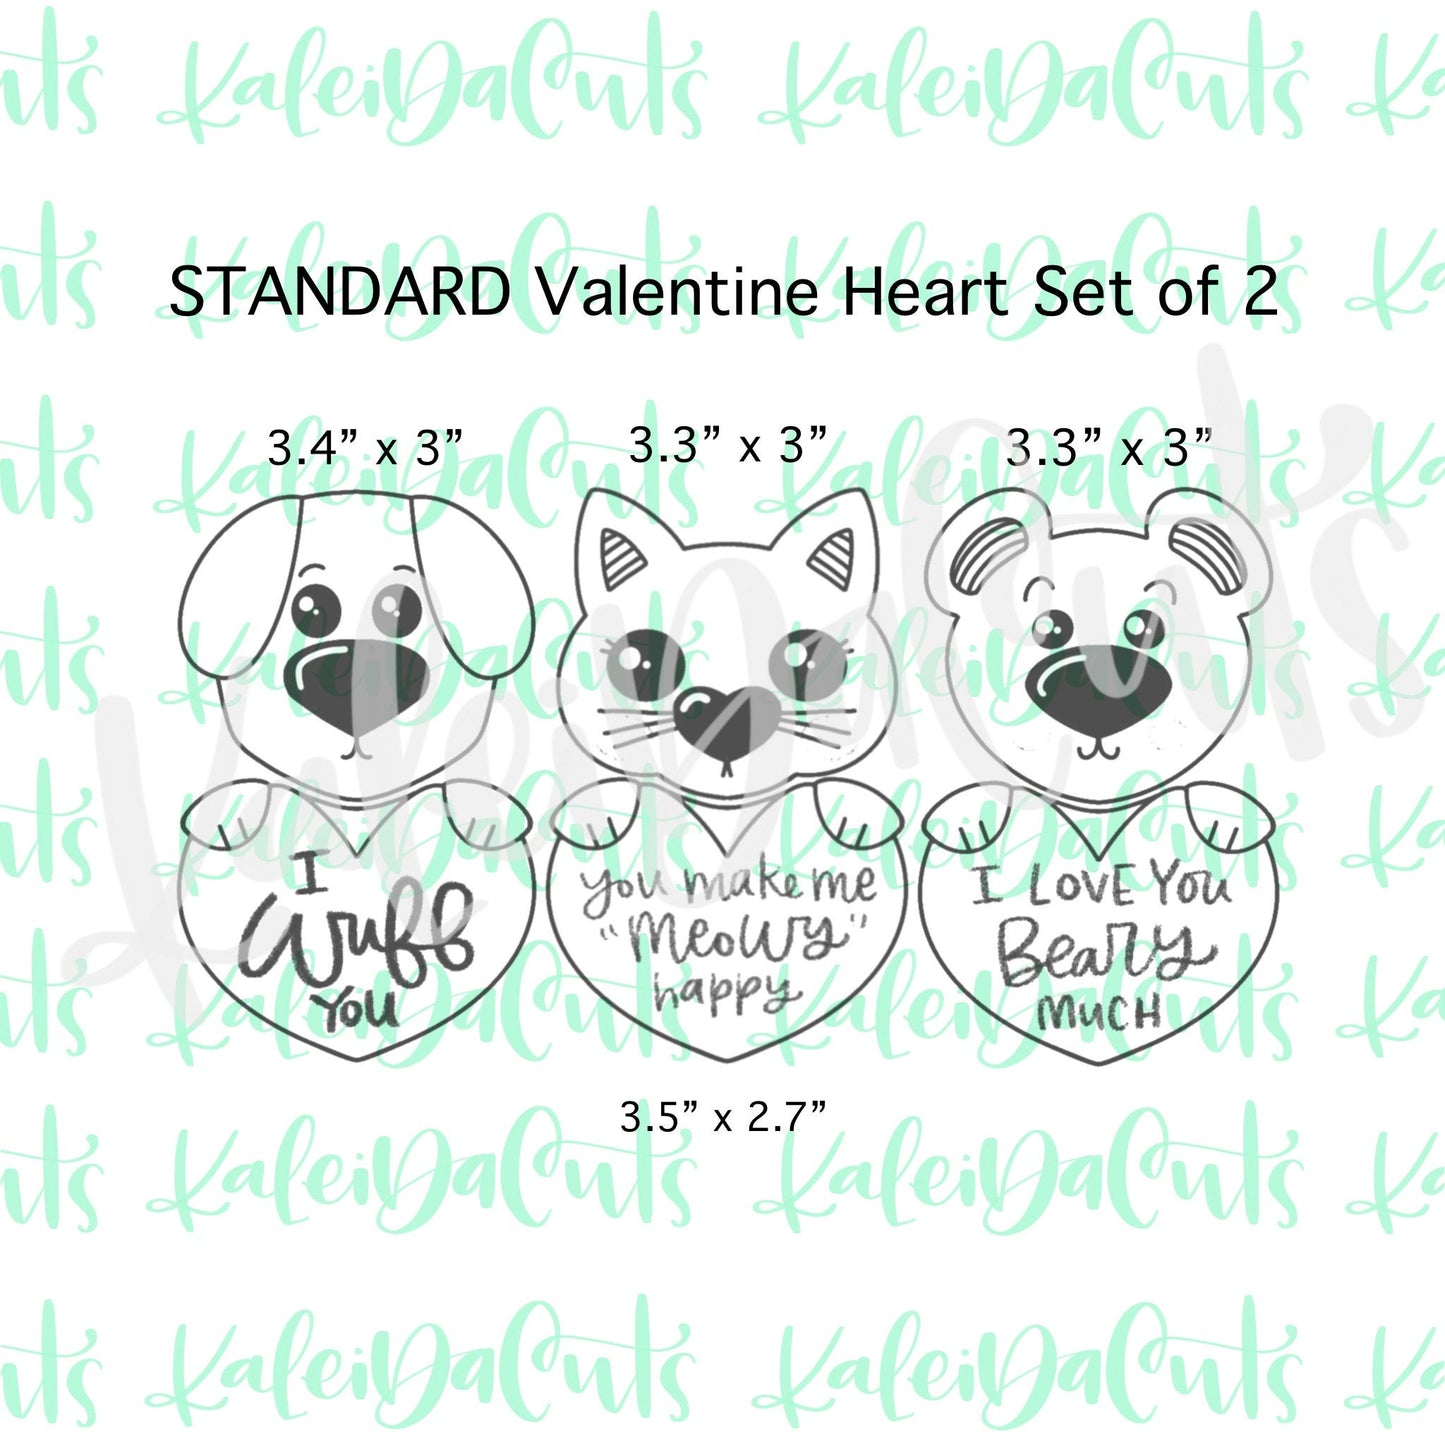 Standard Valentine Heart Set - Build Your Own Character